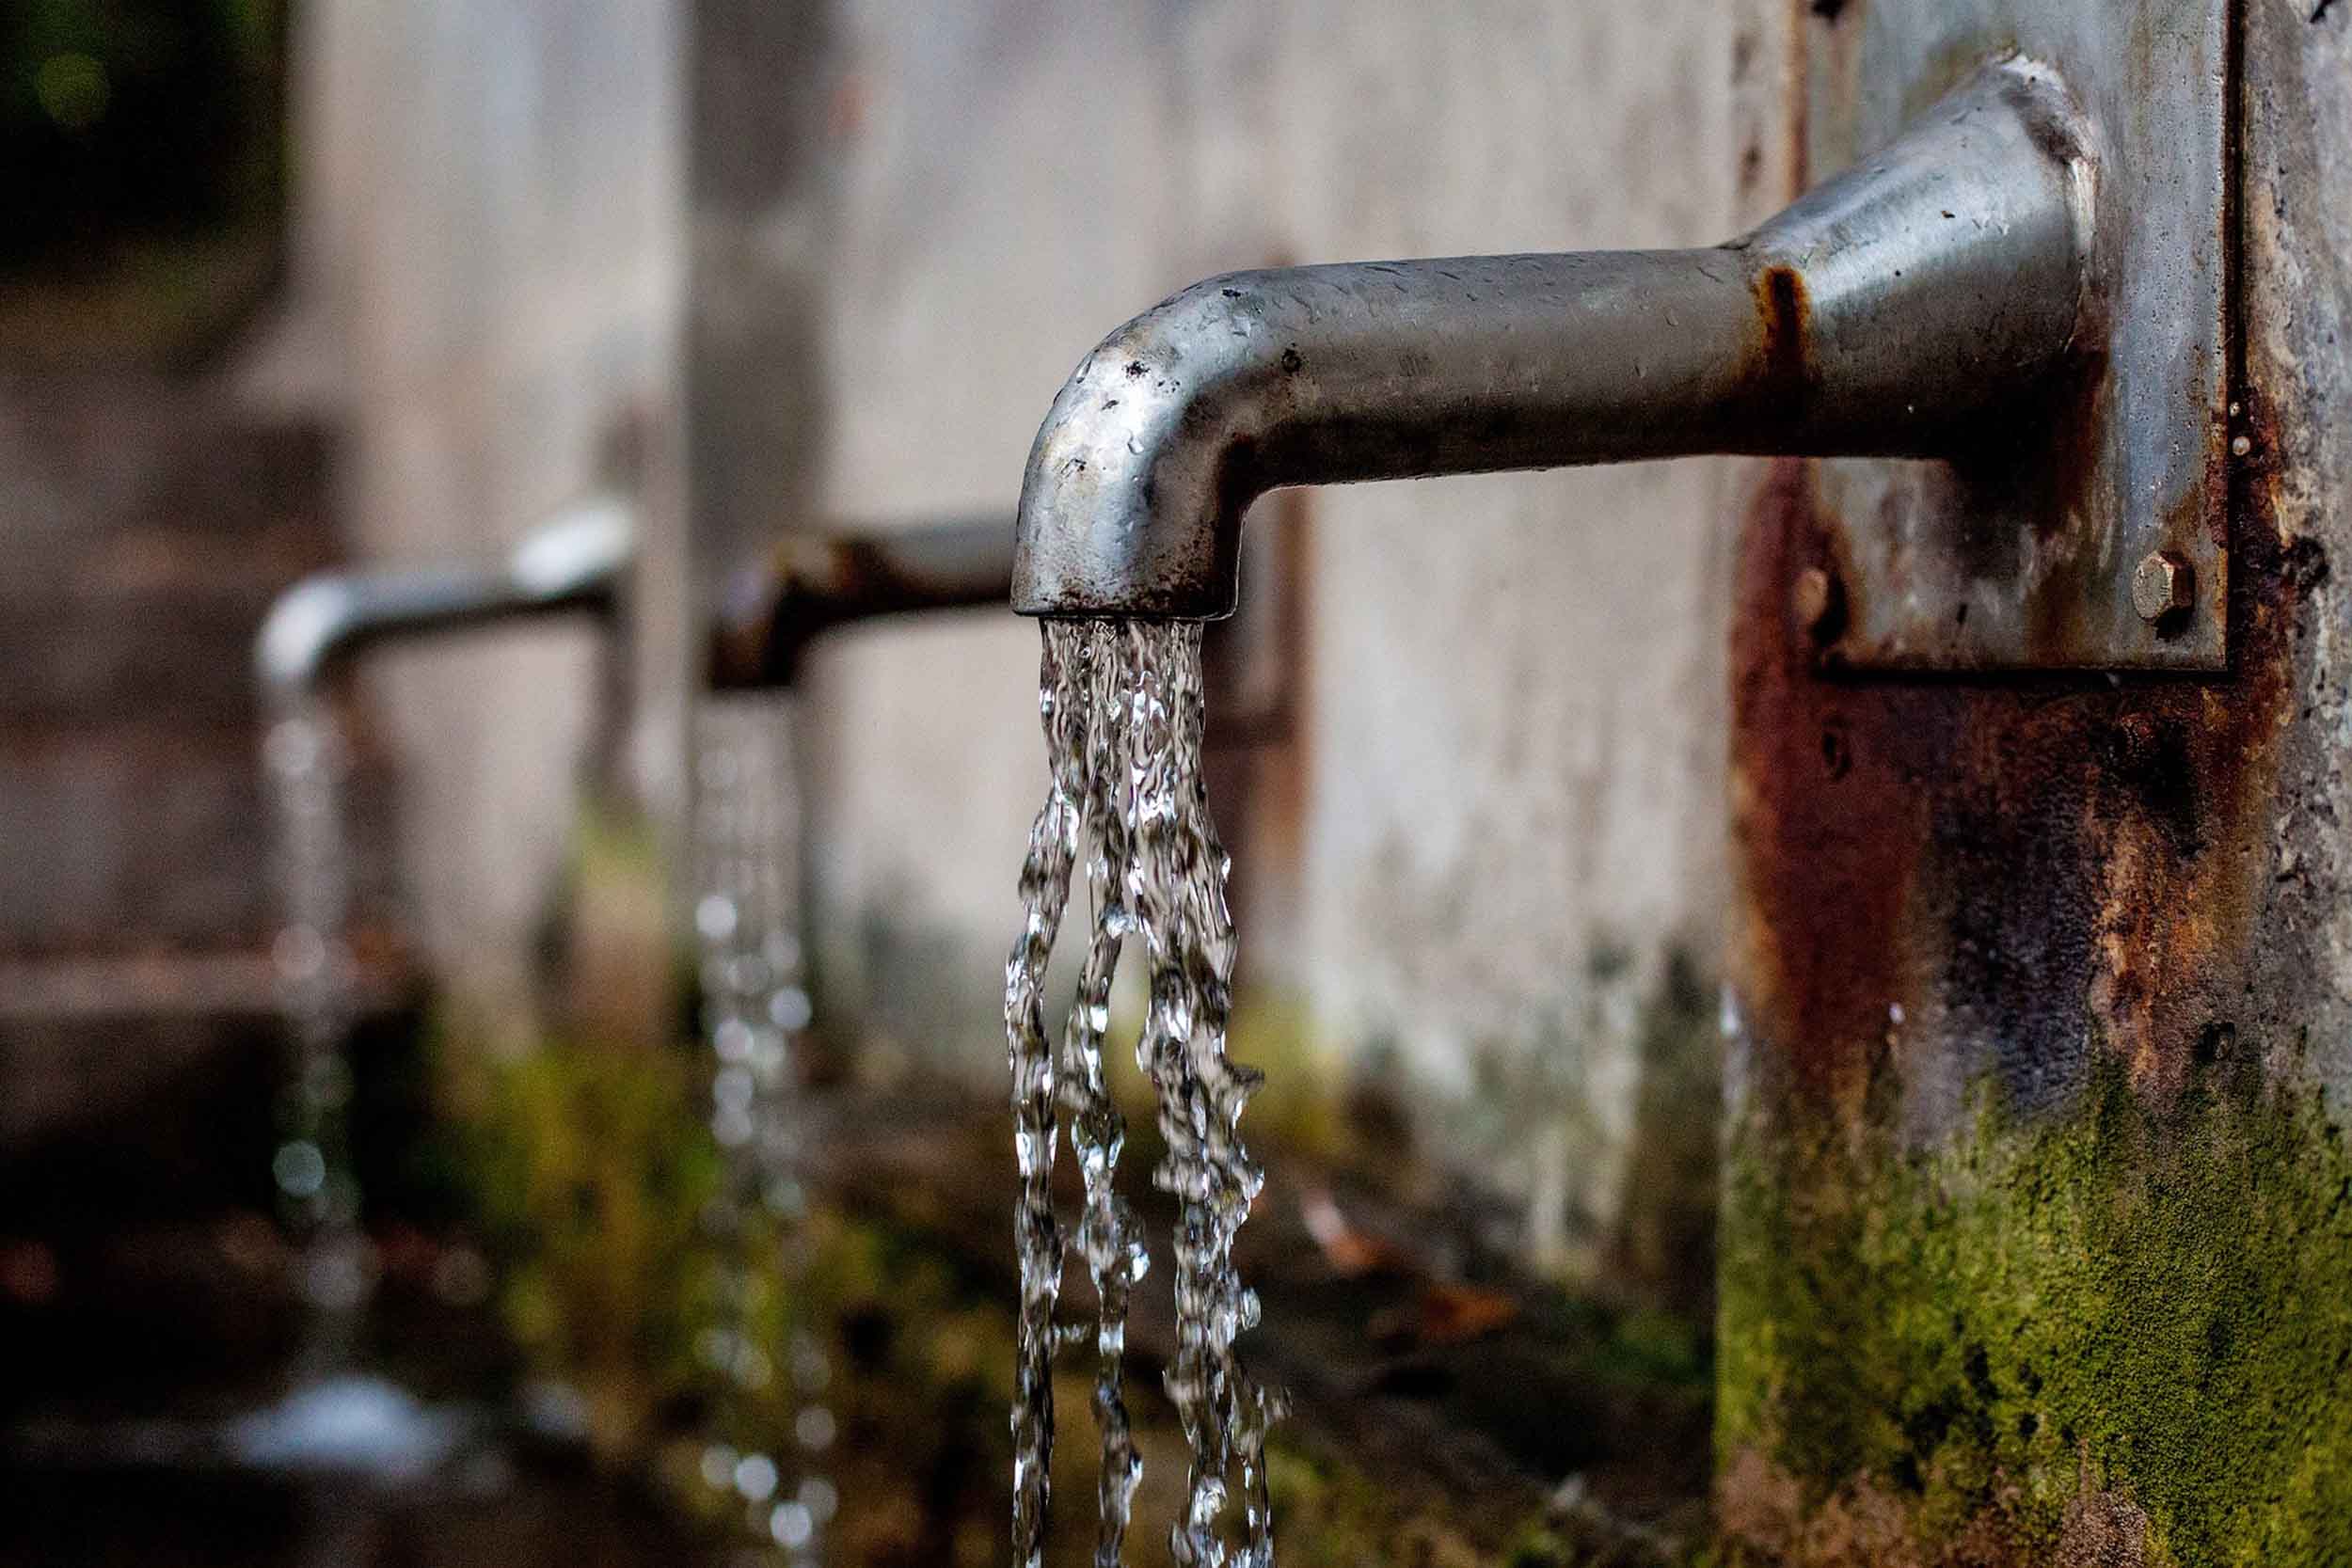 Stock image of a rustic outdoor water faucet with water coming out.